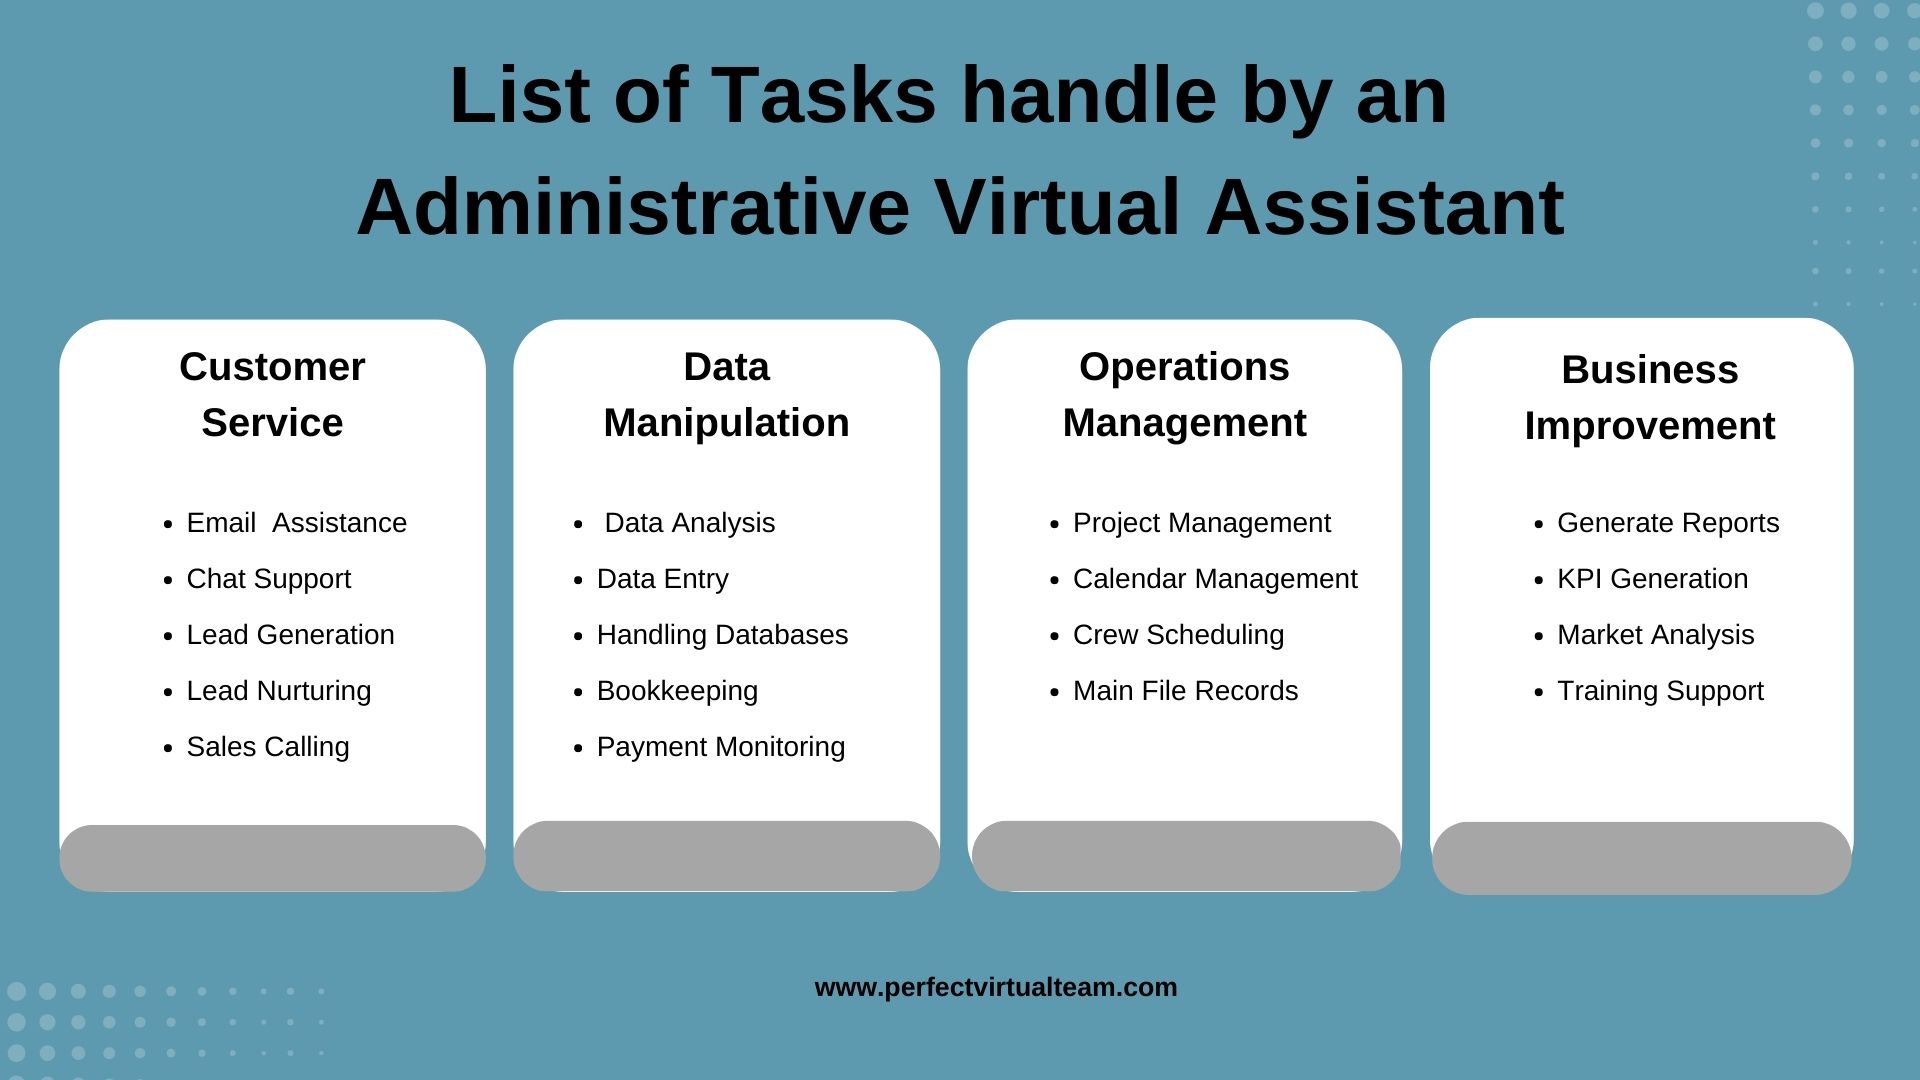 Tasks that can handle by a Virtual Administrative Assistant